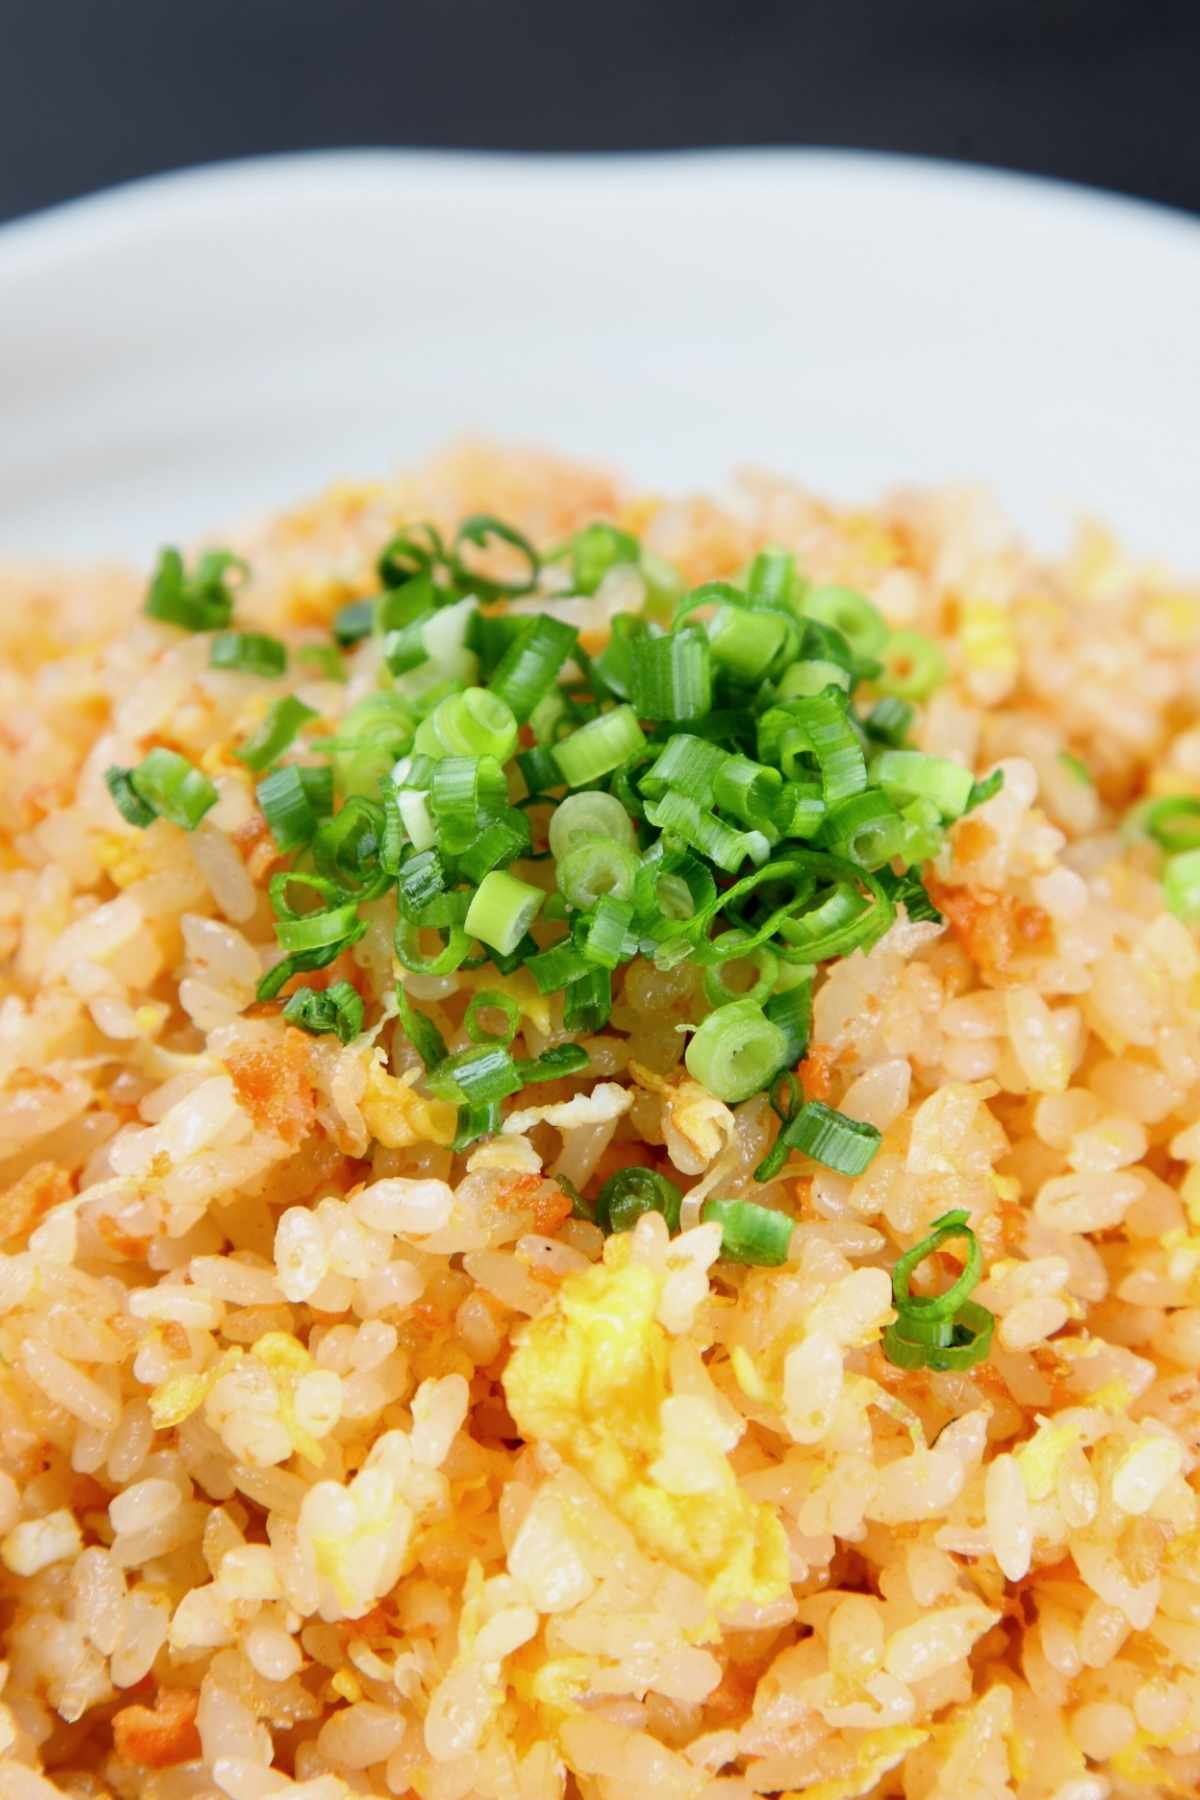 If you’ve ever eaten at a Japanese hibachi restaurant, you know the rice is incredibly tasty. This recipe for Hibachi Fried Rice is equally as good. It has everything you love including eggs, ginger, onions, rice, and seasonings.